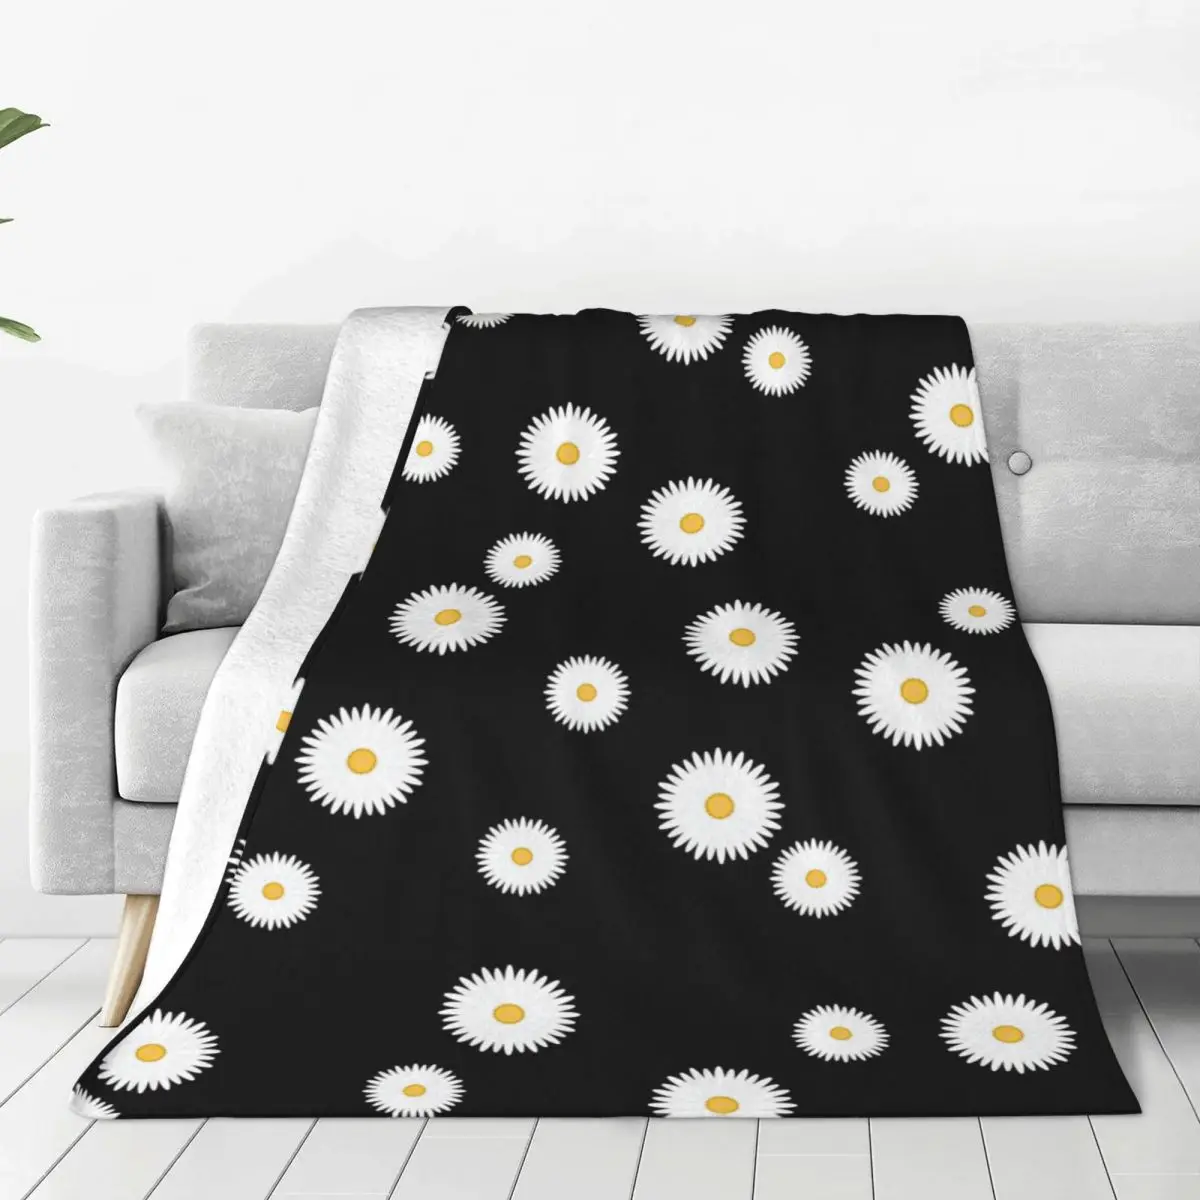 

Chrysanthemum Blanket Ultra Soft Cozy Blooming Flowers Decorative Flannel Blanket All Season For Home Couch Bed Chair Travel